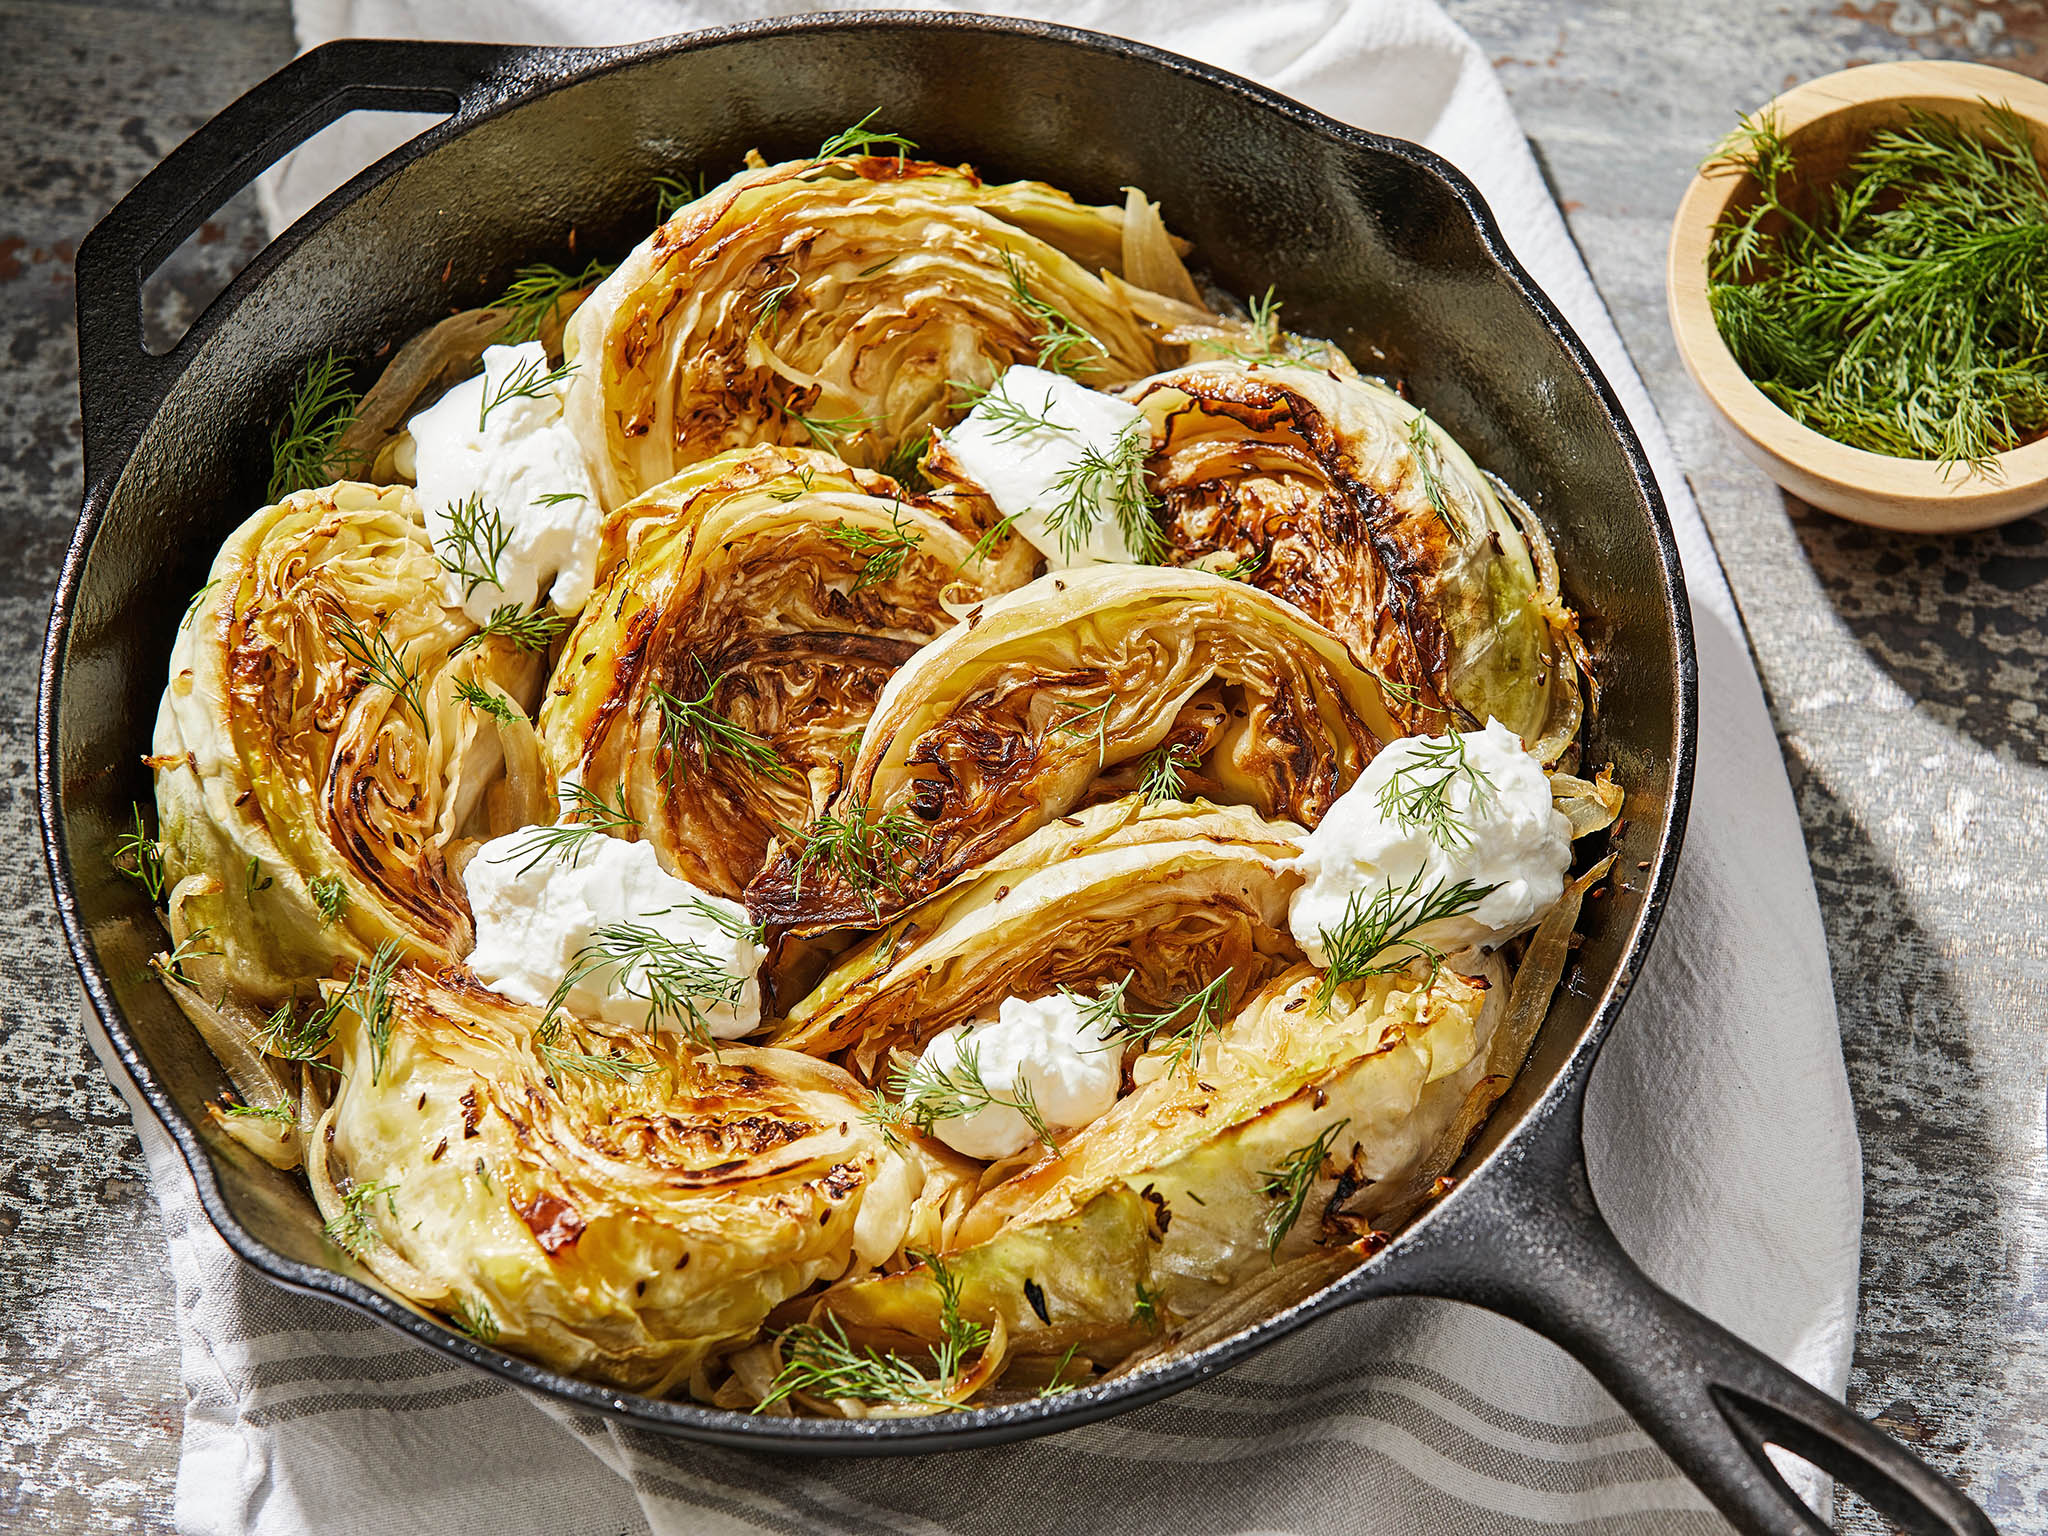 This dish realises cabbage’s full potential